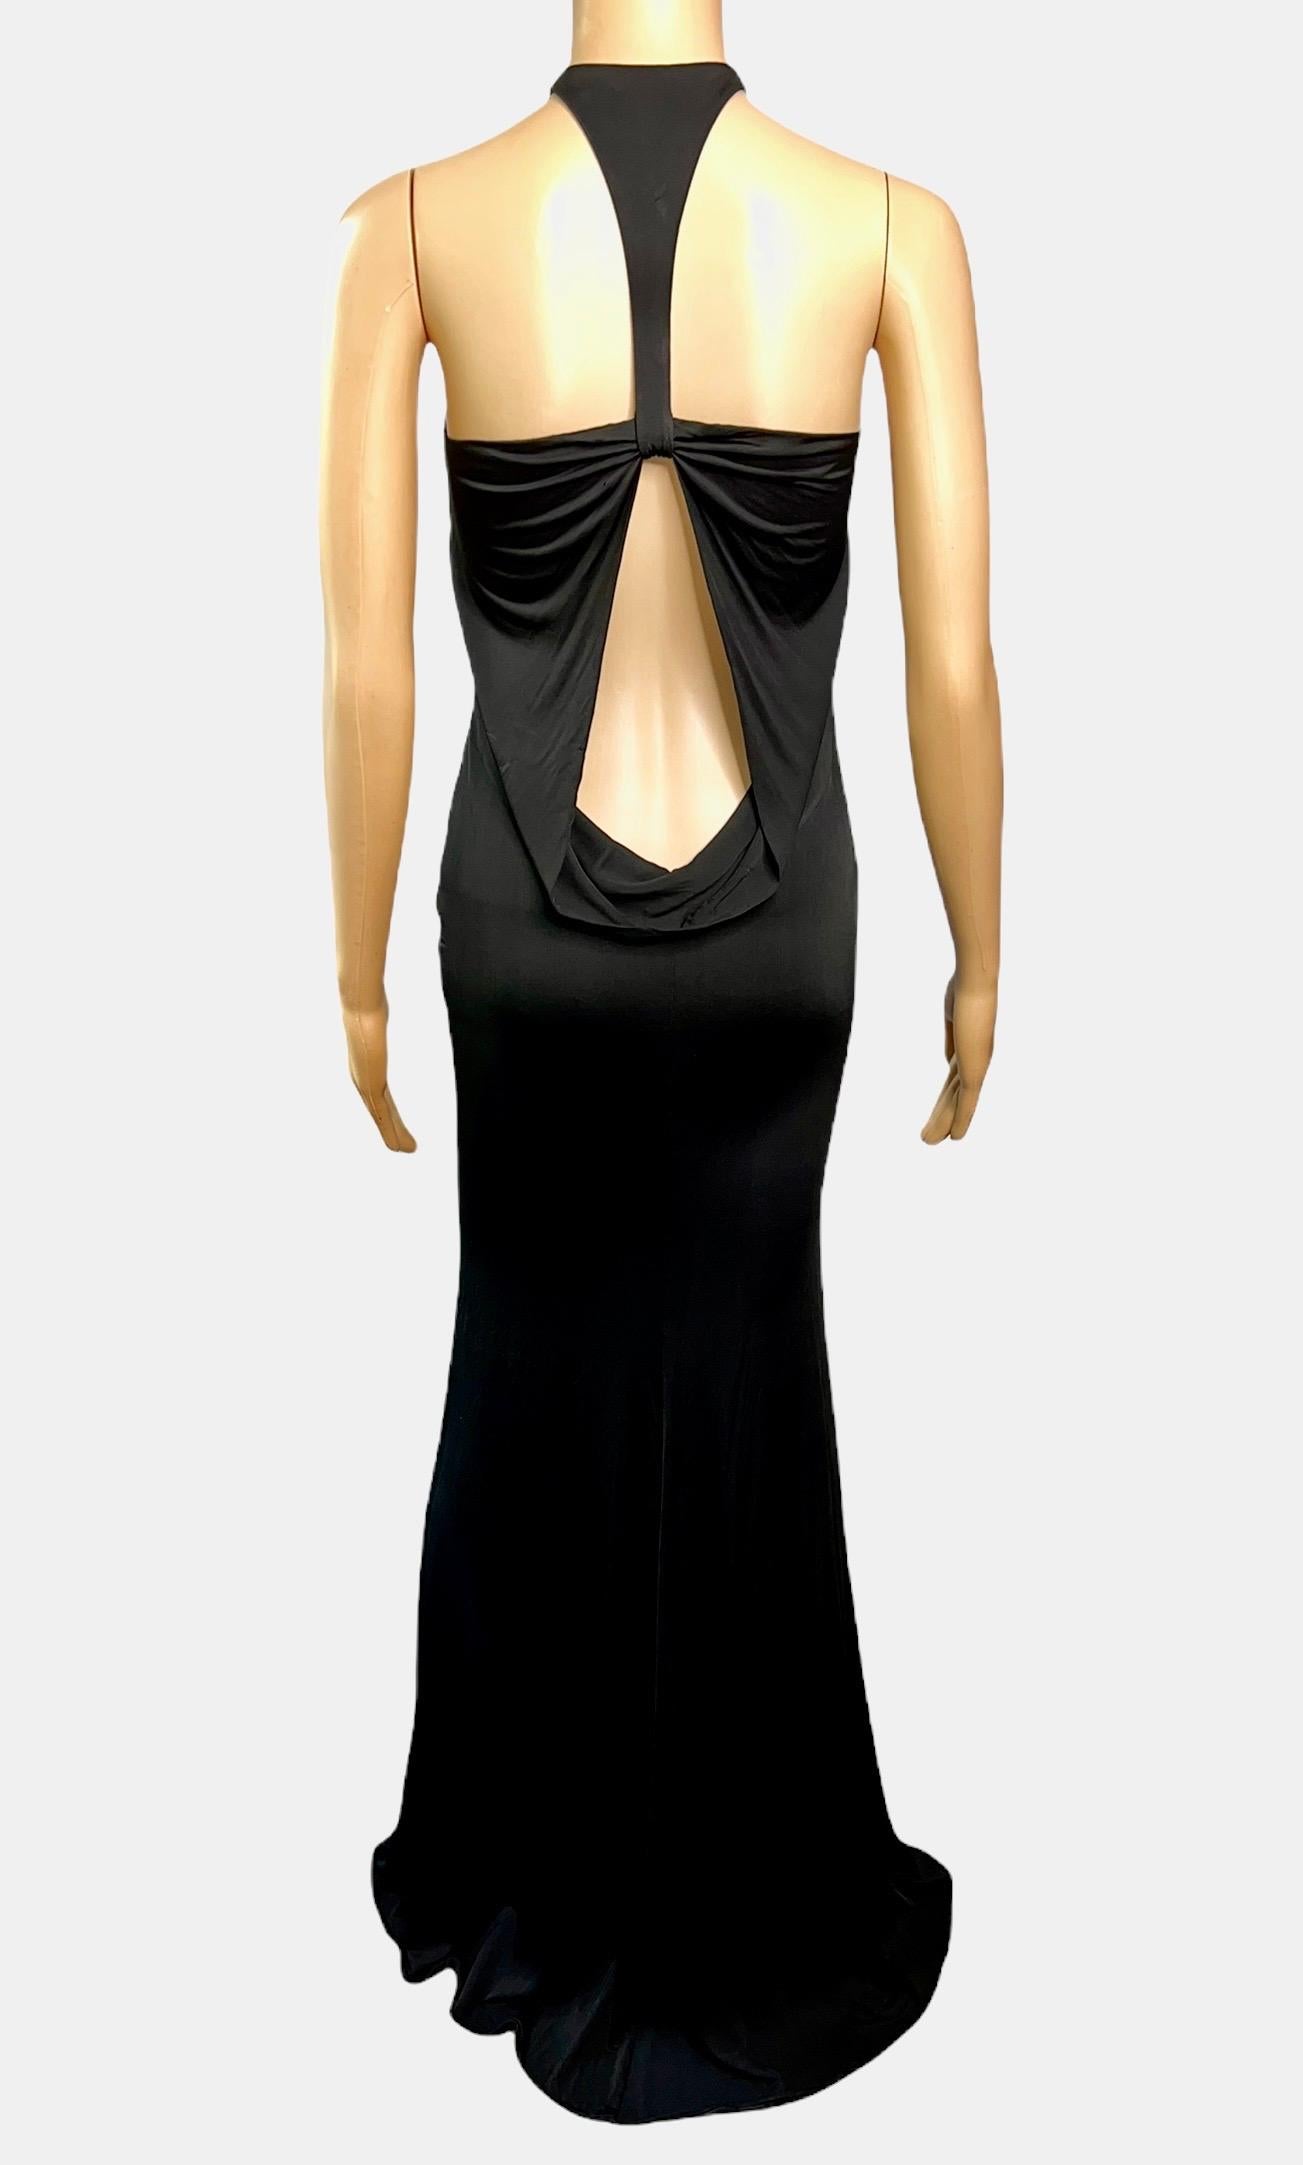 Tom Ford for Gucci F/W 2004 Plunging Cutout Black Evening Dress Gown 

Please note size tag has been removed - the material is stretchy and will fit sizes M-L.



